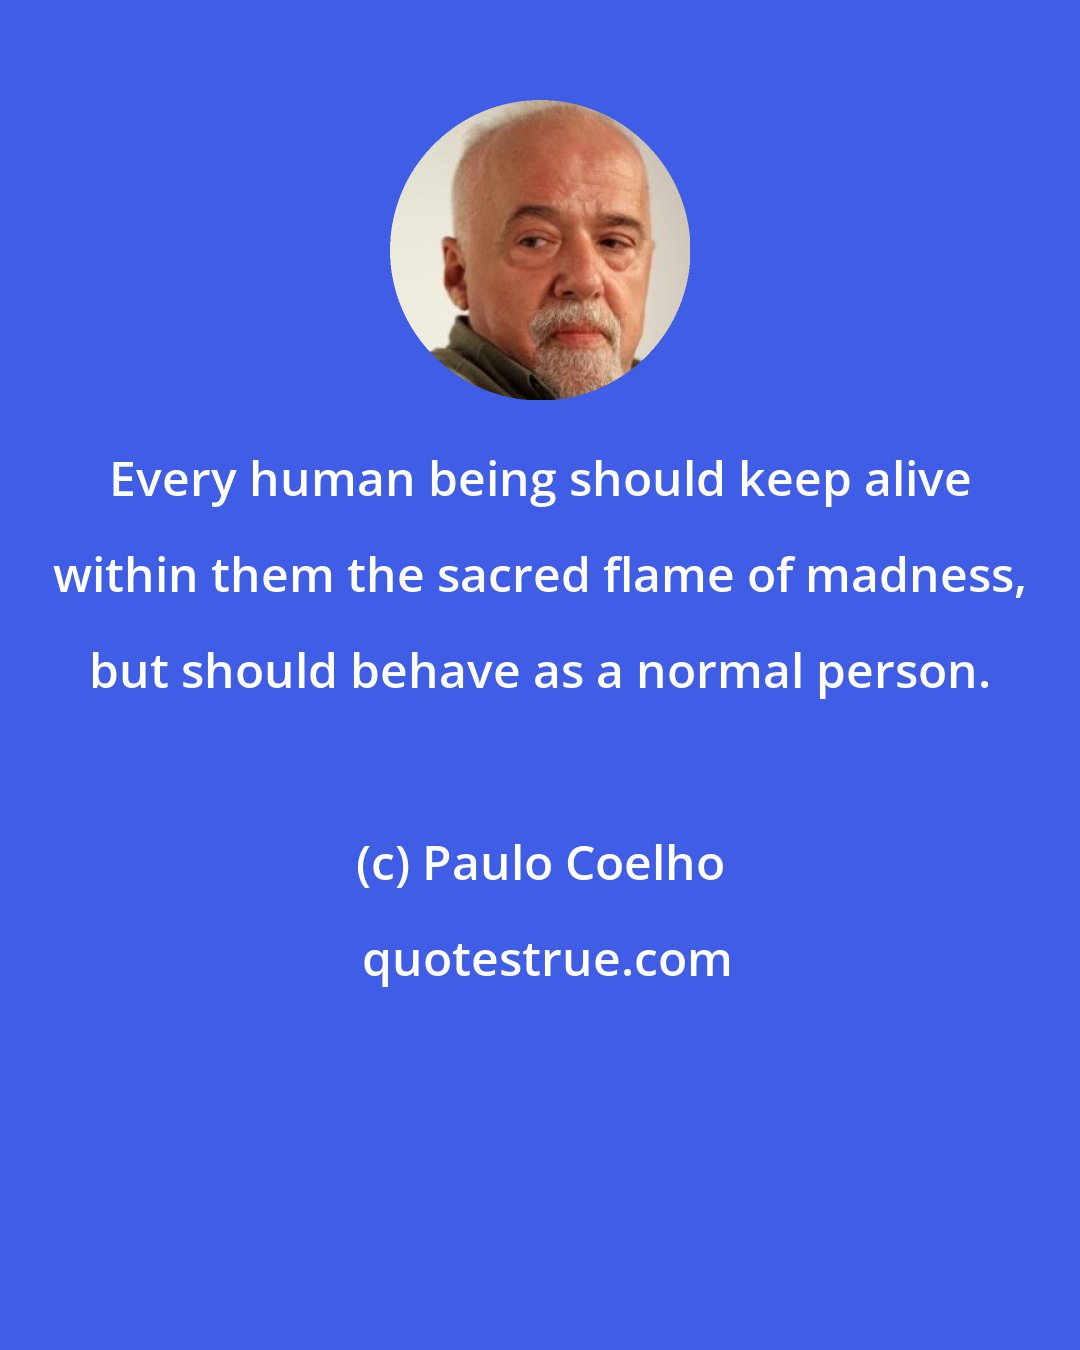 Paulo Coelho: Every human being should keep alive within them the sacred flame of madness, but should behave as a normal person.